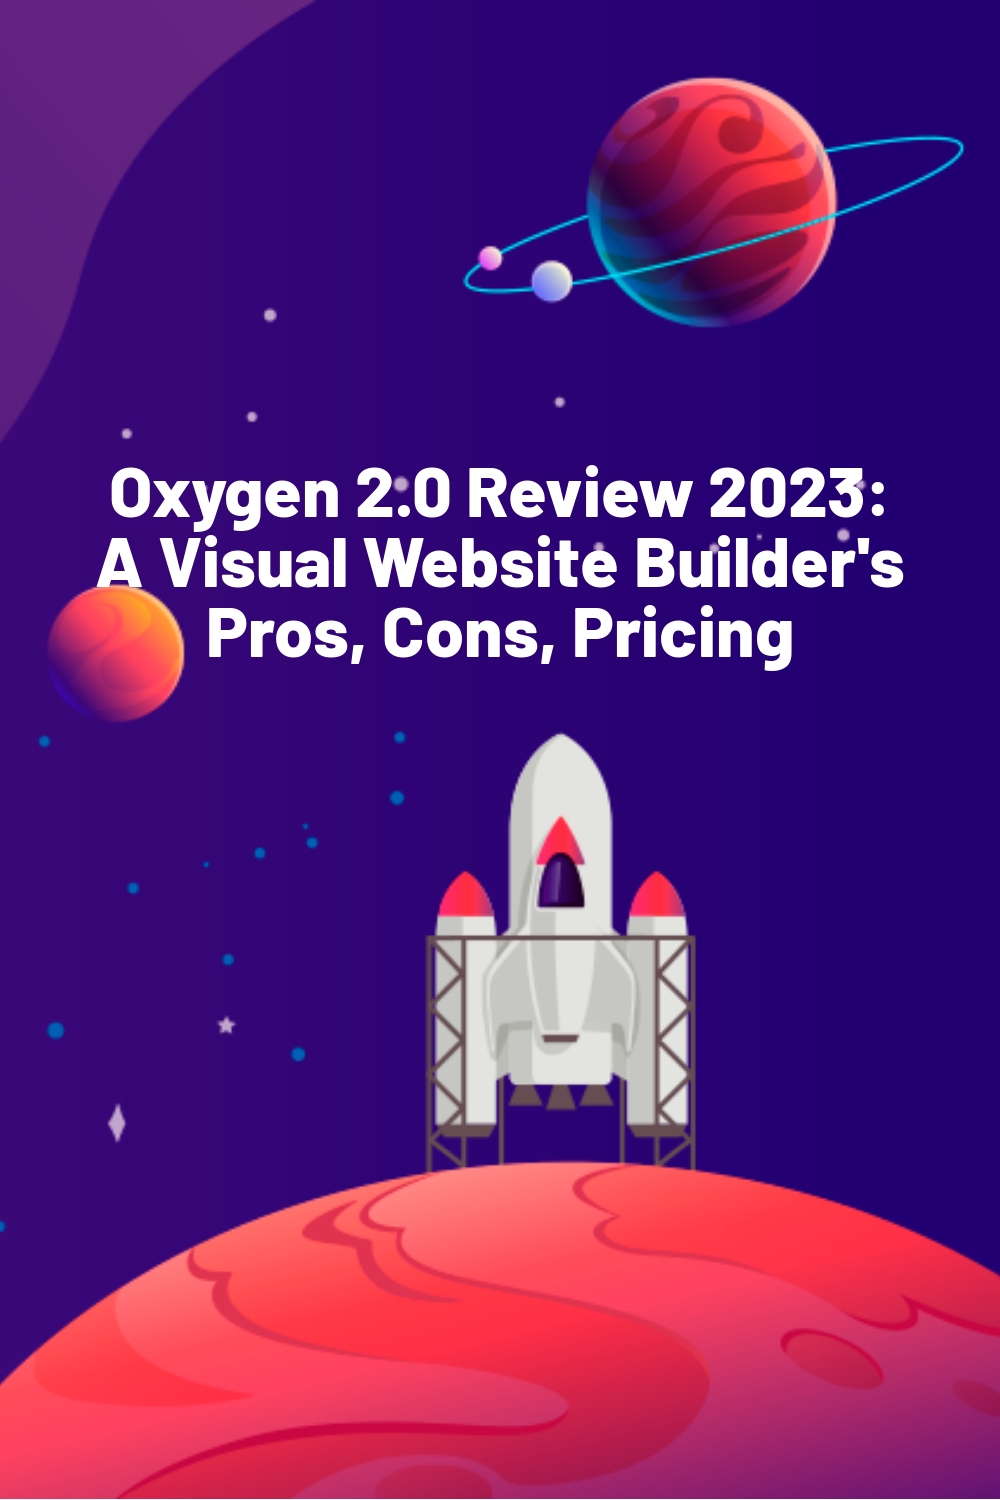 Oxygen 2.0 Review 2023: A Visual Website Builder’s Pros, Cons, Pricing